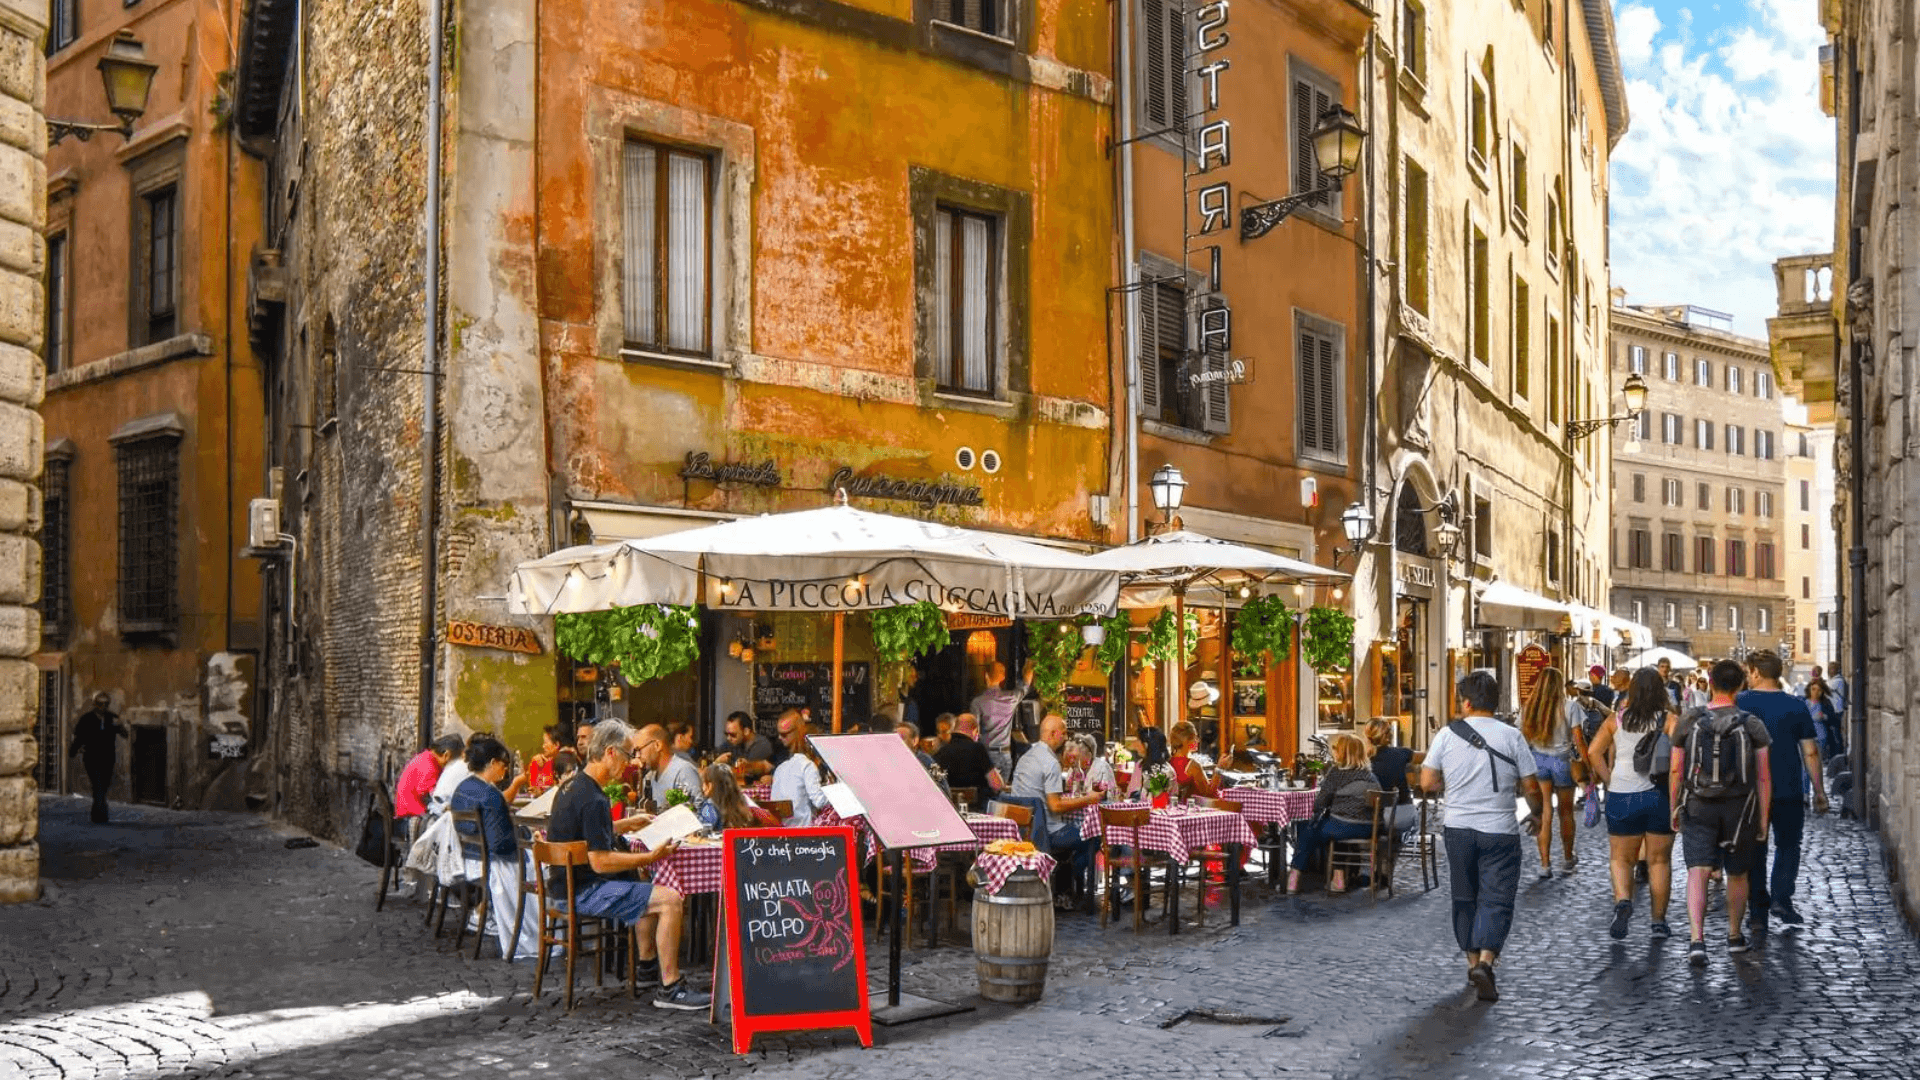 Rome Travel Guide: 5 Things You Must Do On Your Trip to Rome